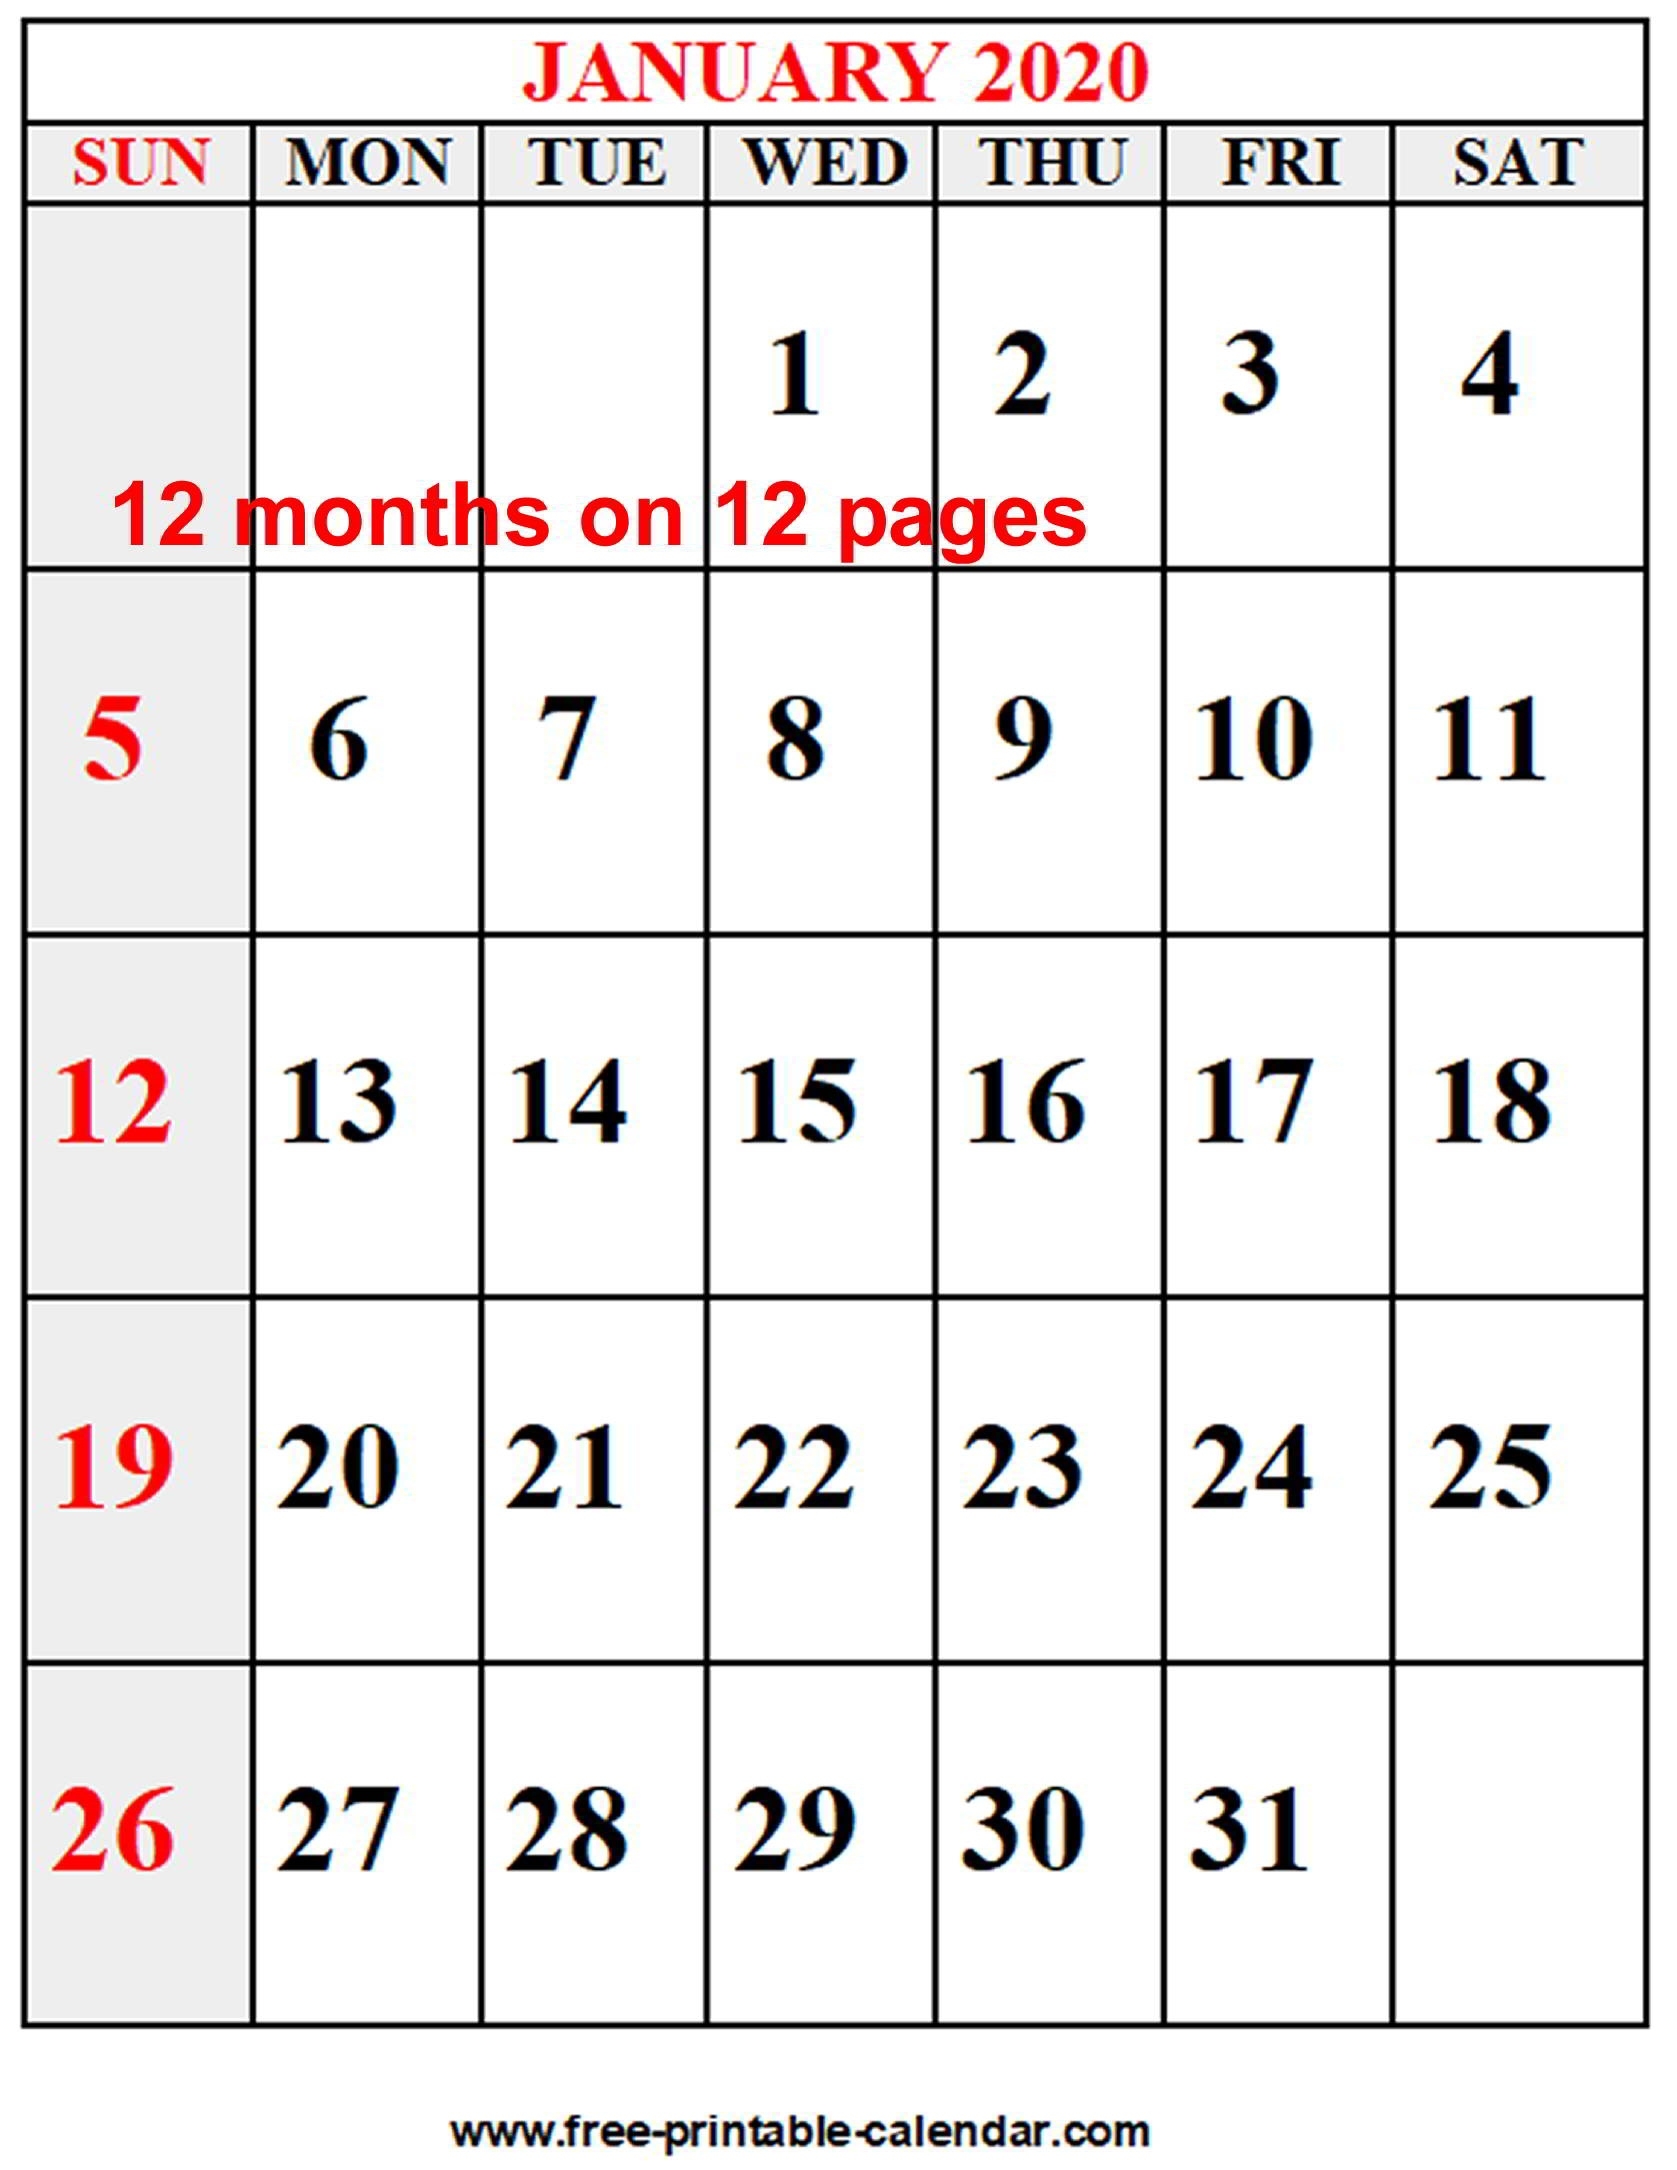 Year 2020 Calendar - Free-Printable-Calendar Extraordinary Free 2020 Calendar With Note 12 Pages